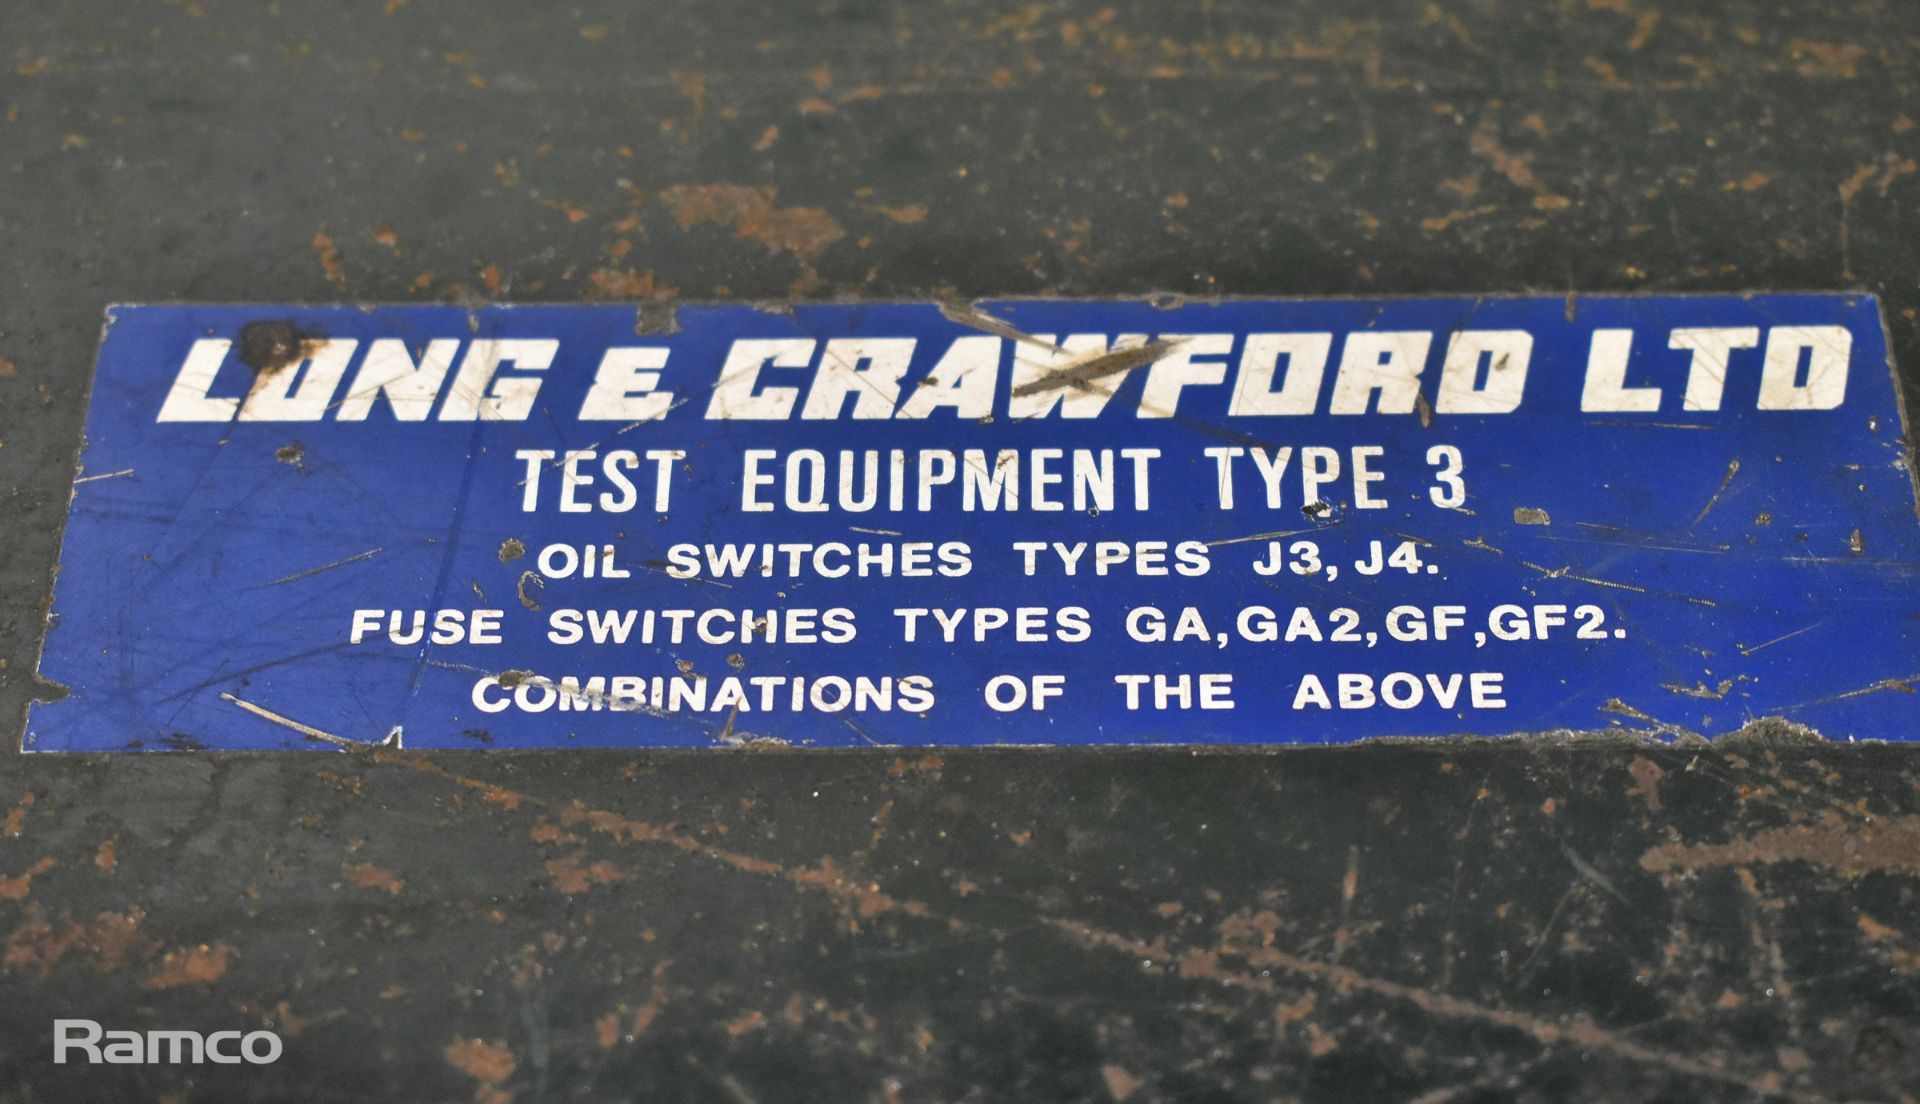 Long & Crawford Ltd test equipment Type 3 for oil switches and fuse switches - Image 5 of 6